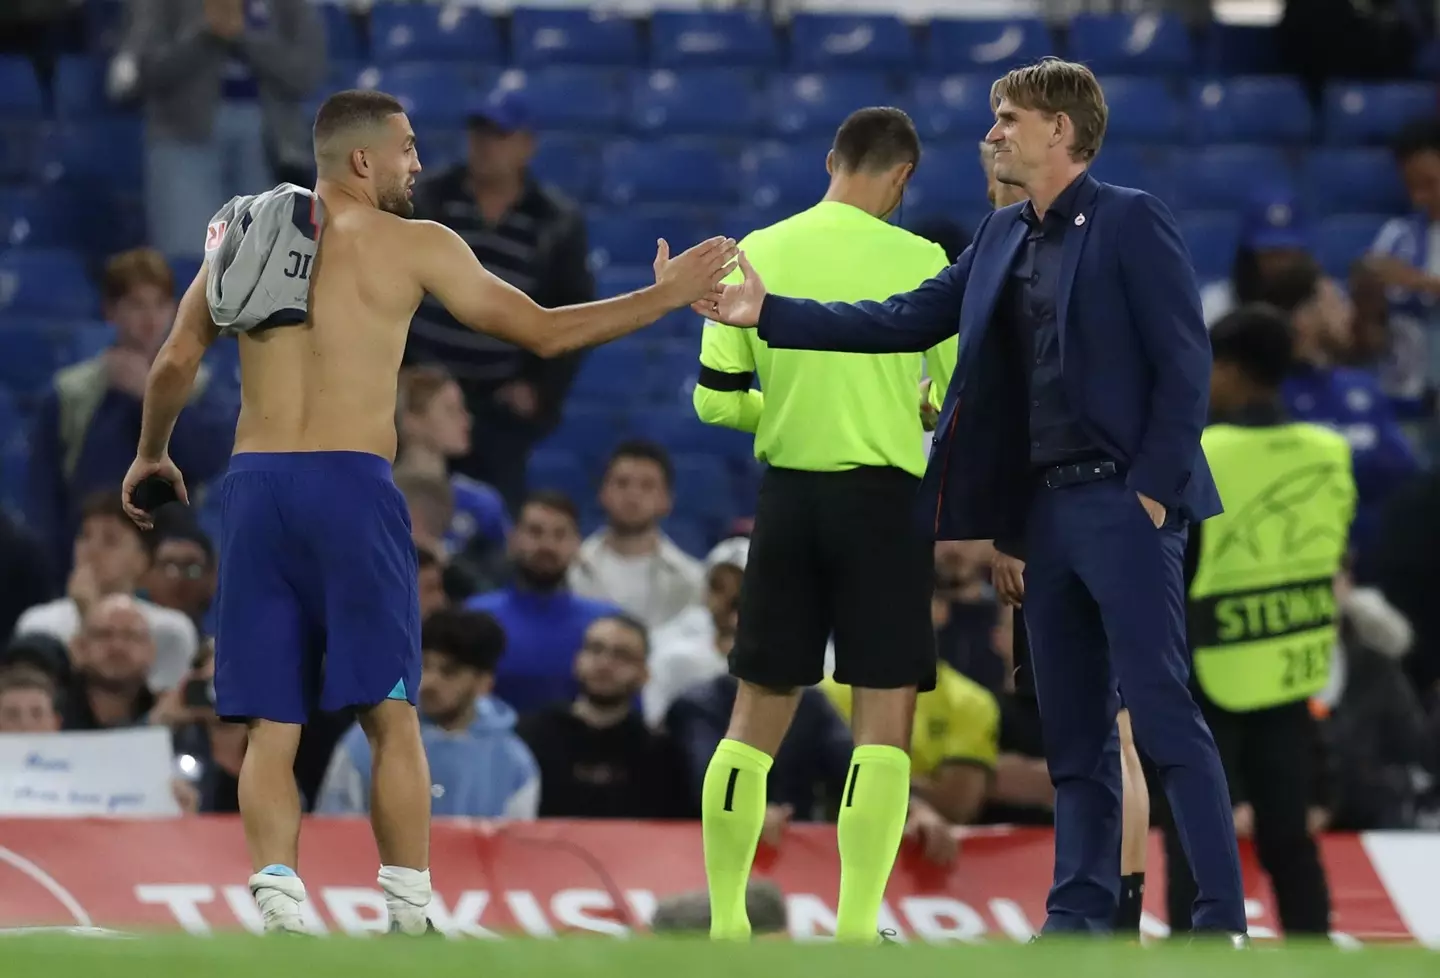 Christoph Freund shakes hands with Mateo Kovacic of Chelsea after the UEFA Champions League match at Stamford Bridge. (Alamy)